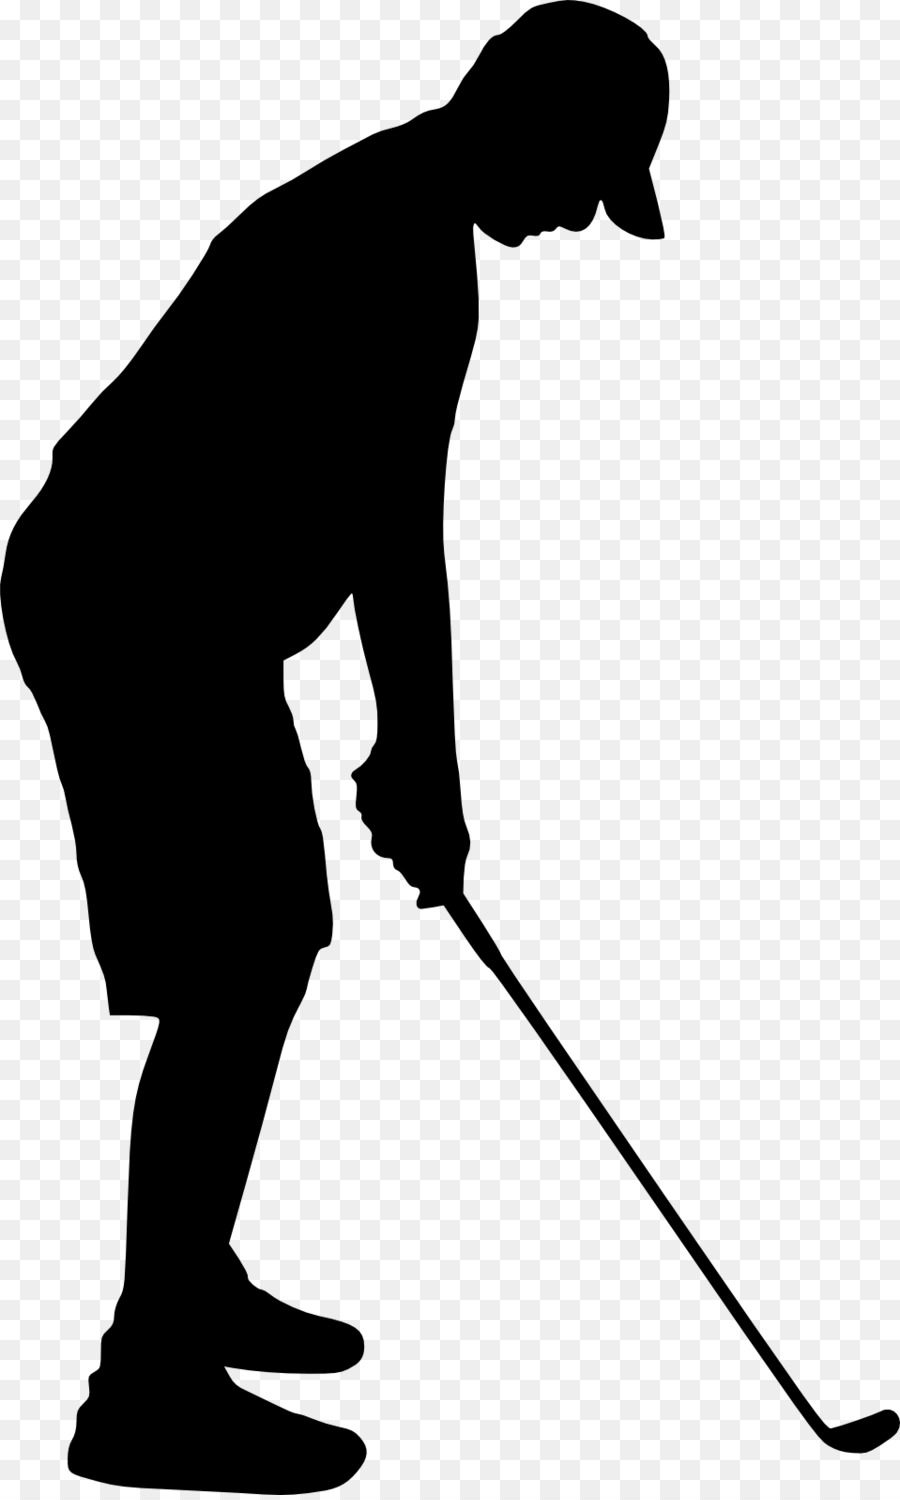 Silhouette Golf Clip art - Silhouette png download - 818*1555 - Free